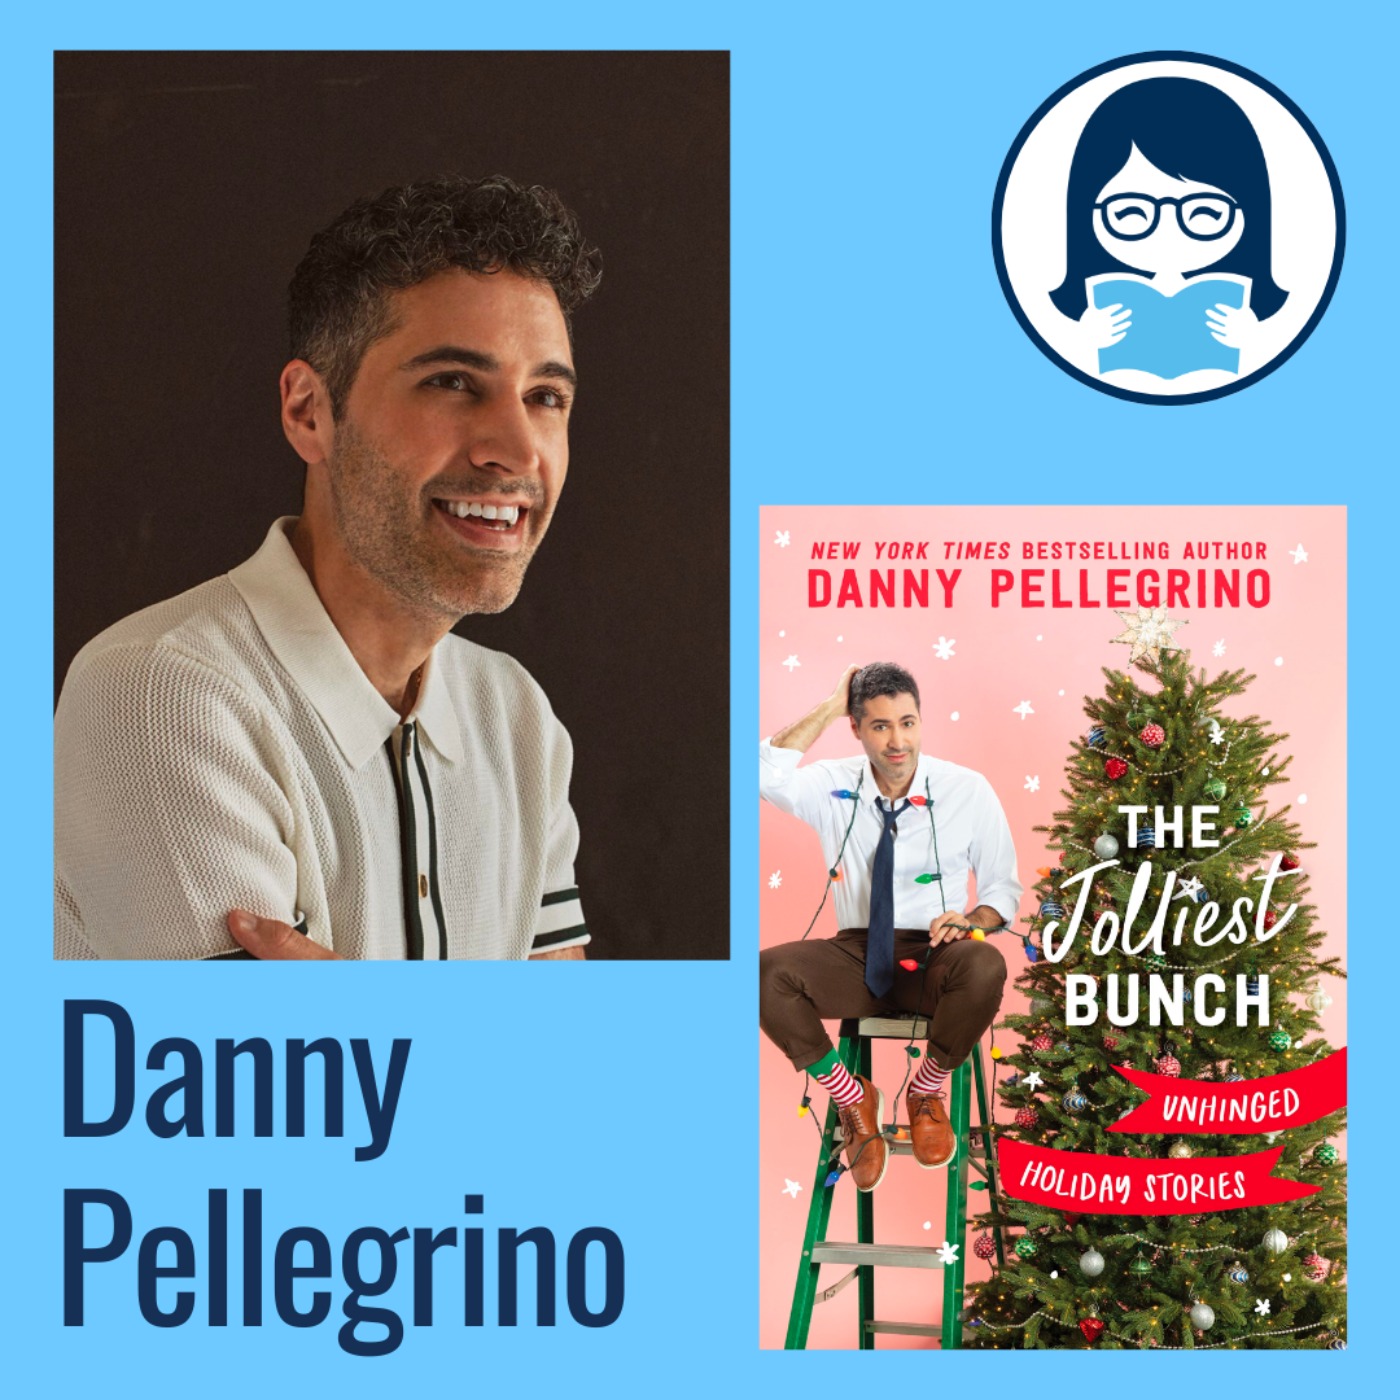 Danny Pellegrino, THE JOLLIEST BUNCH: Unhinged Holiday Stories